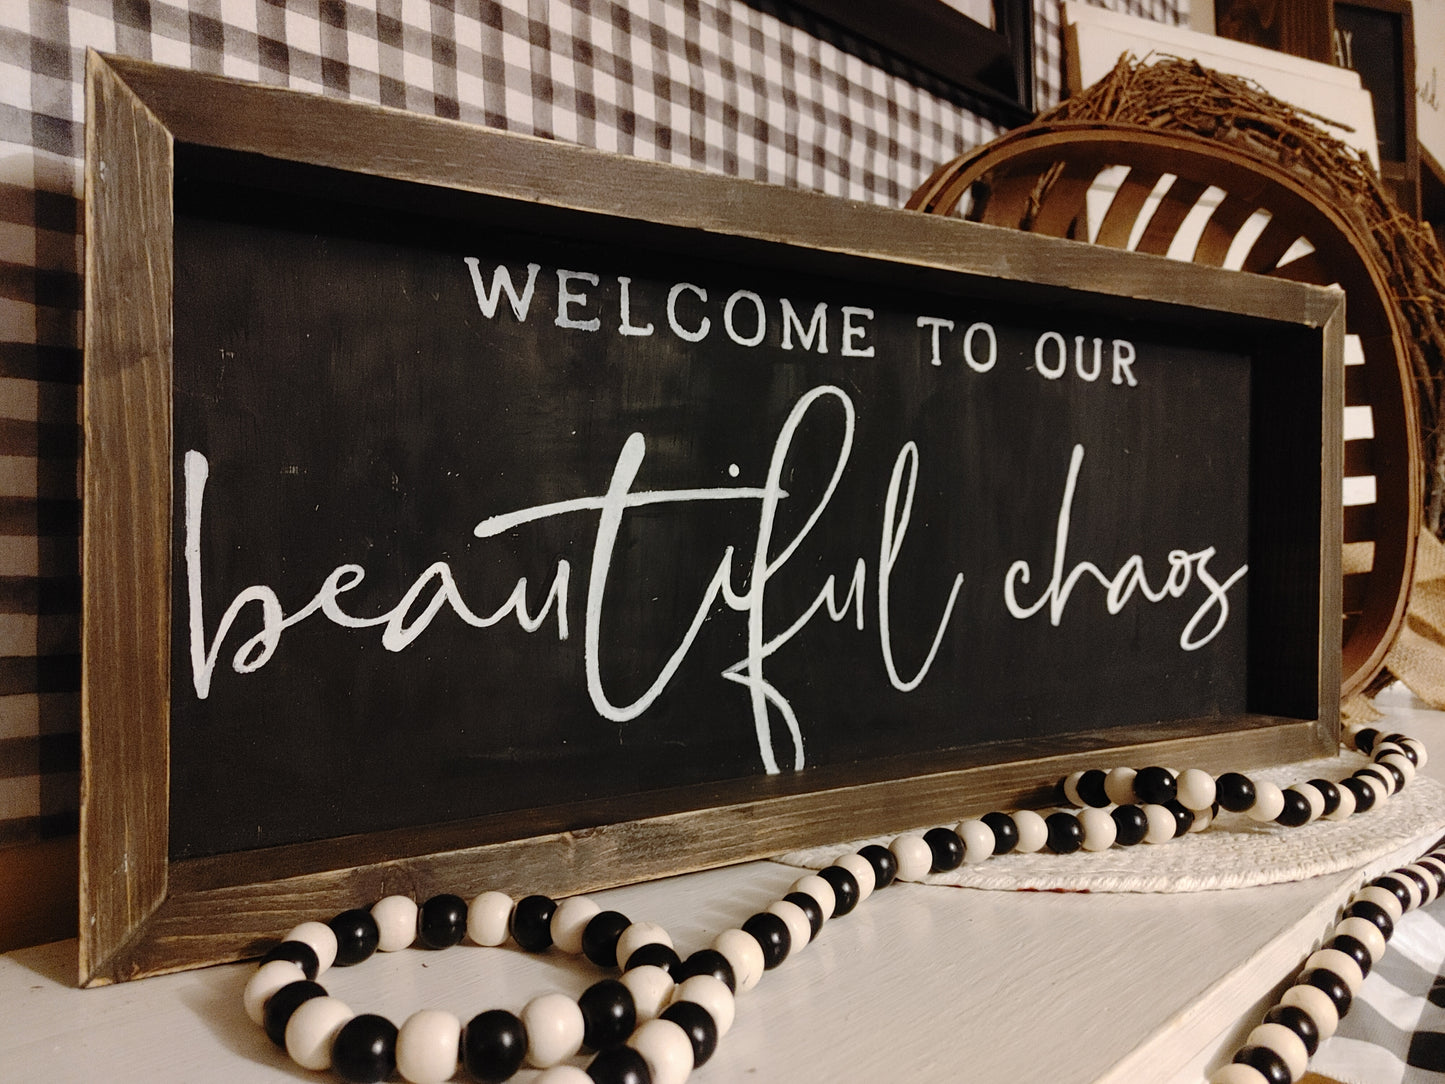 Welcome to our beautiful chaos Sign